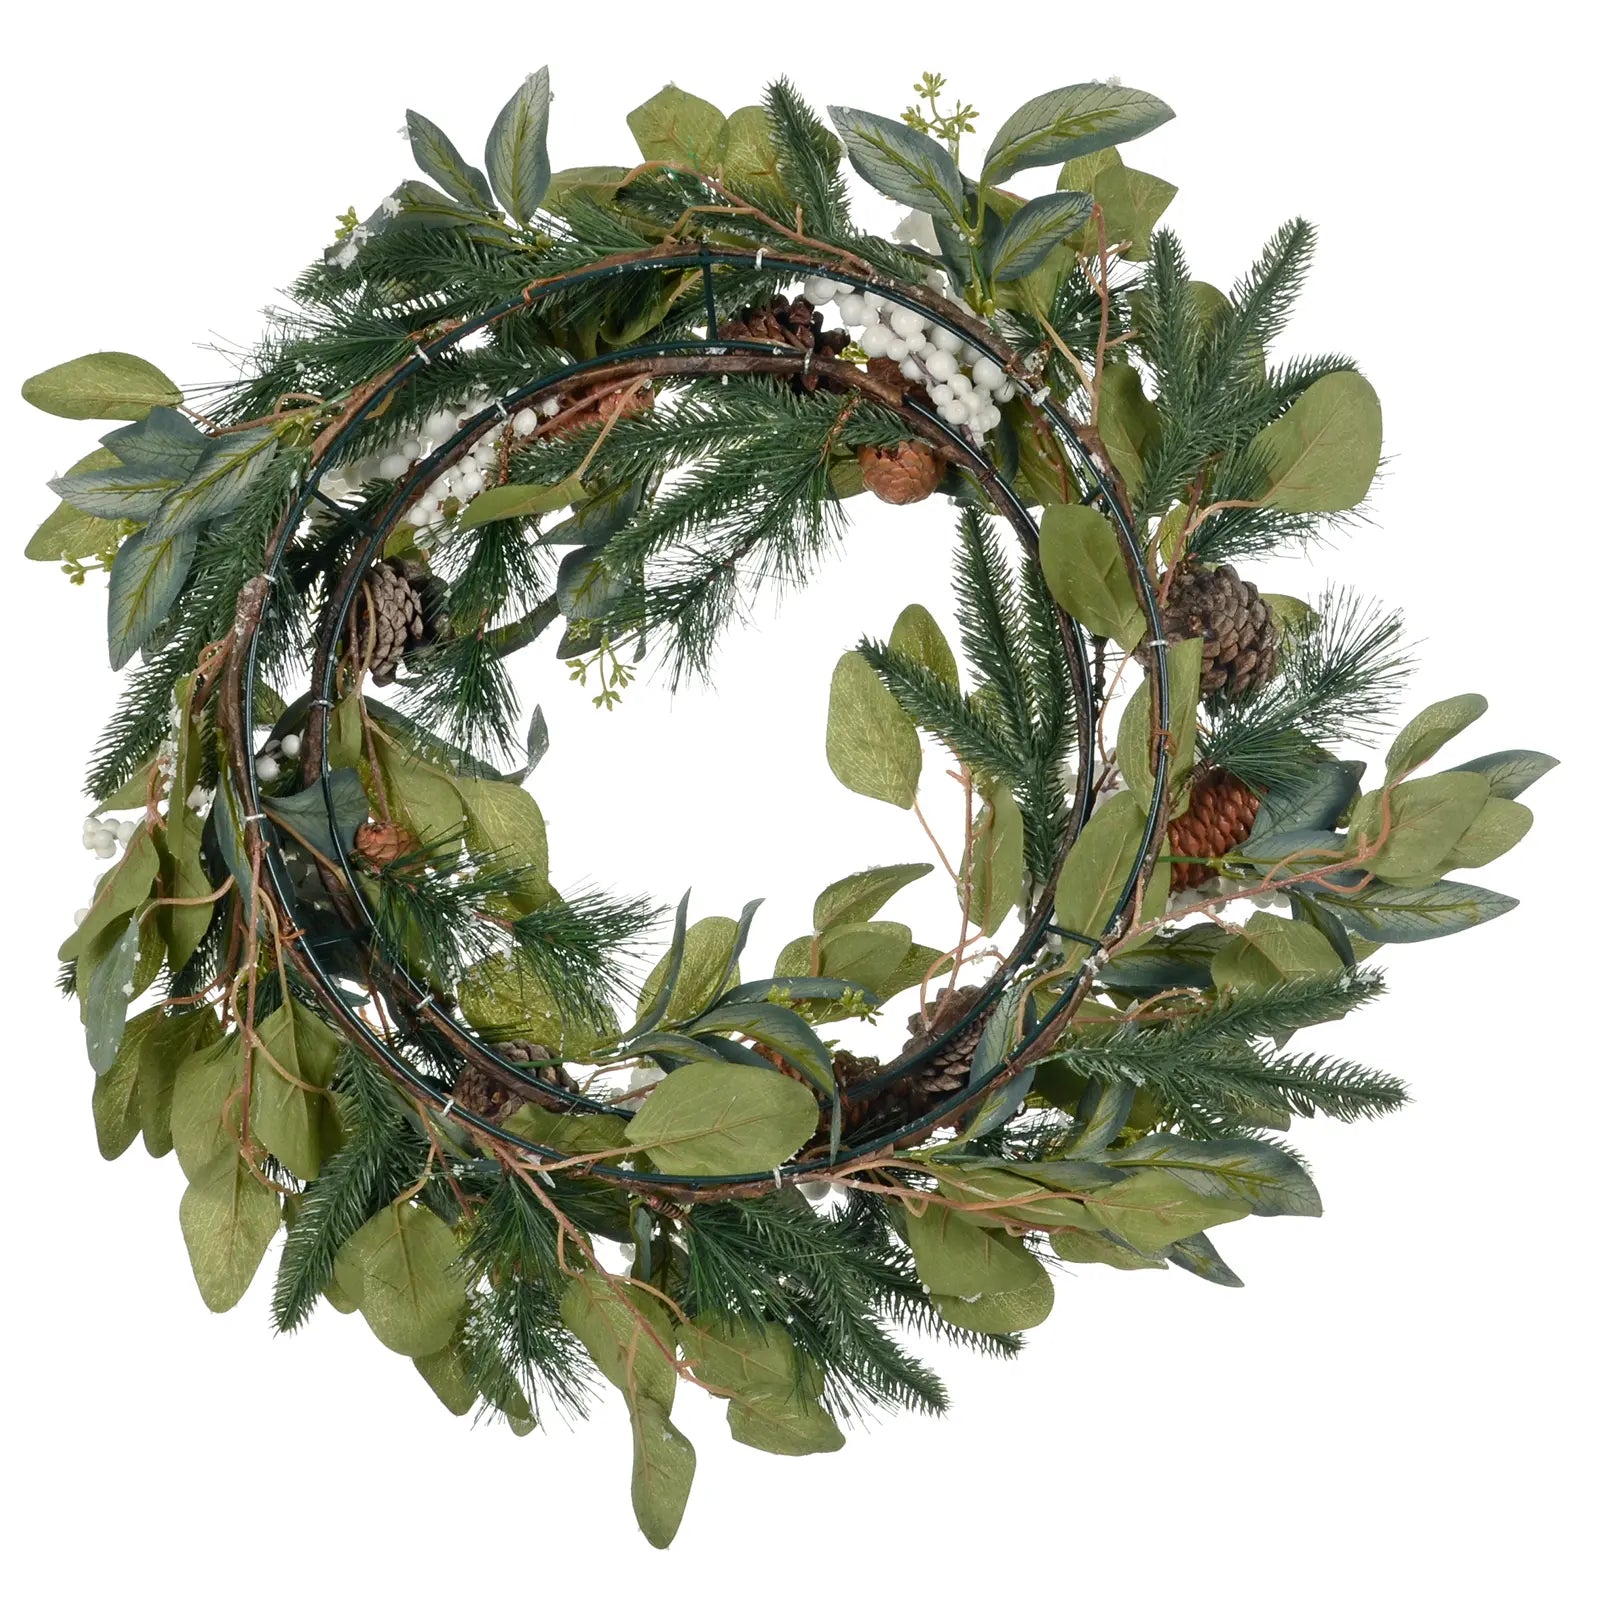 back view of christmas wreath featuring durable double wire metal frame with green coating